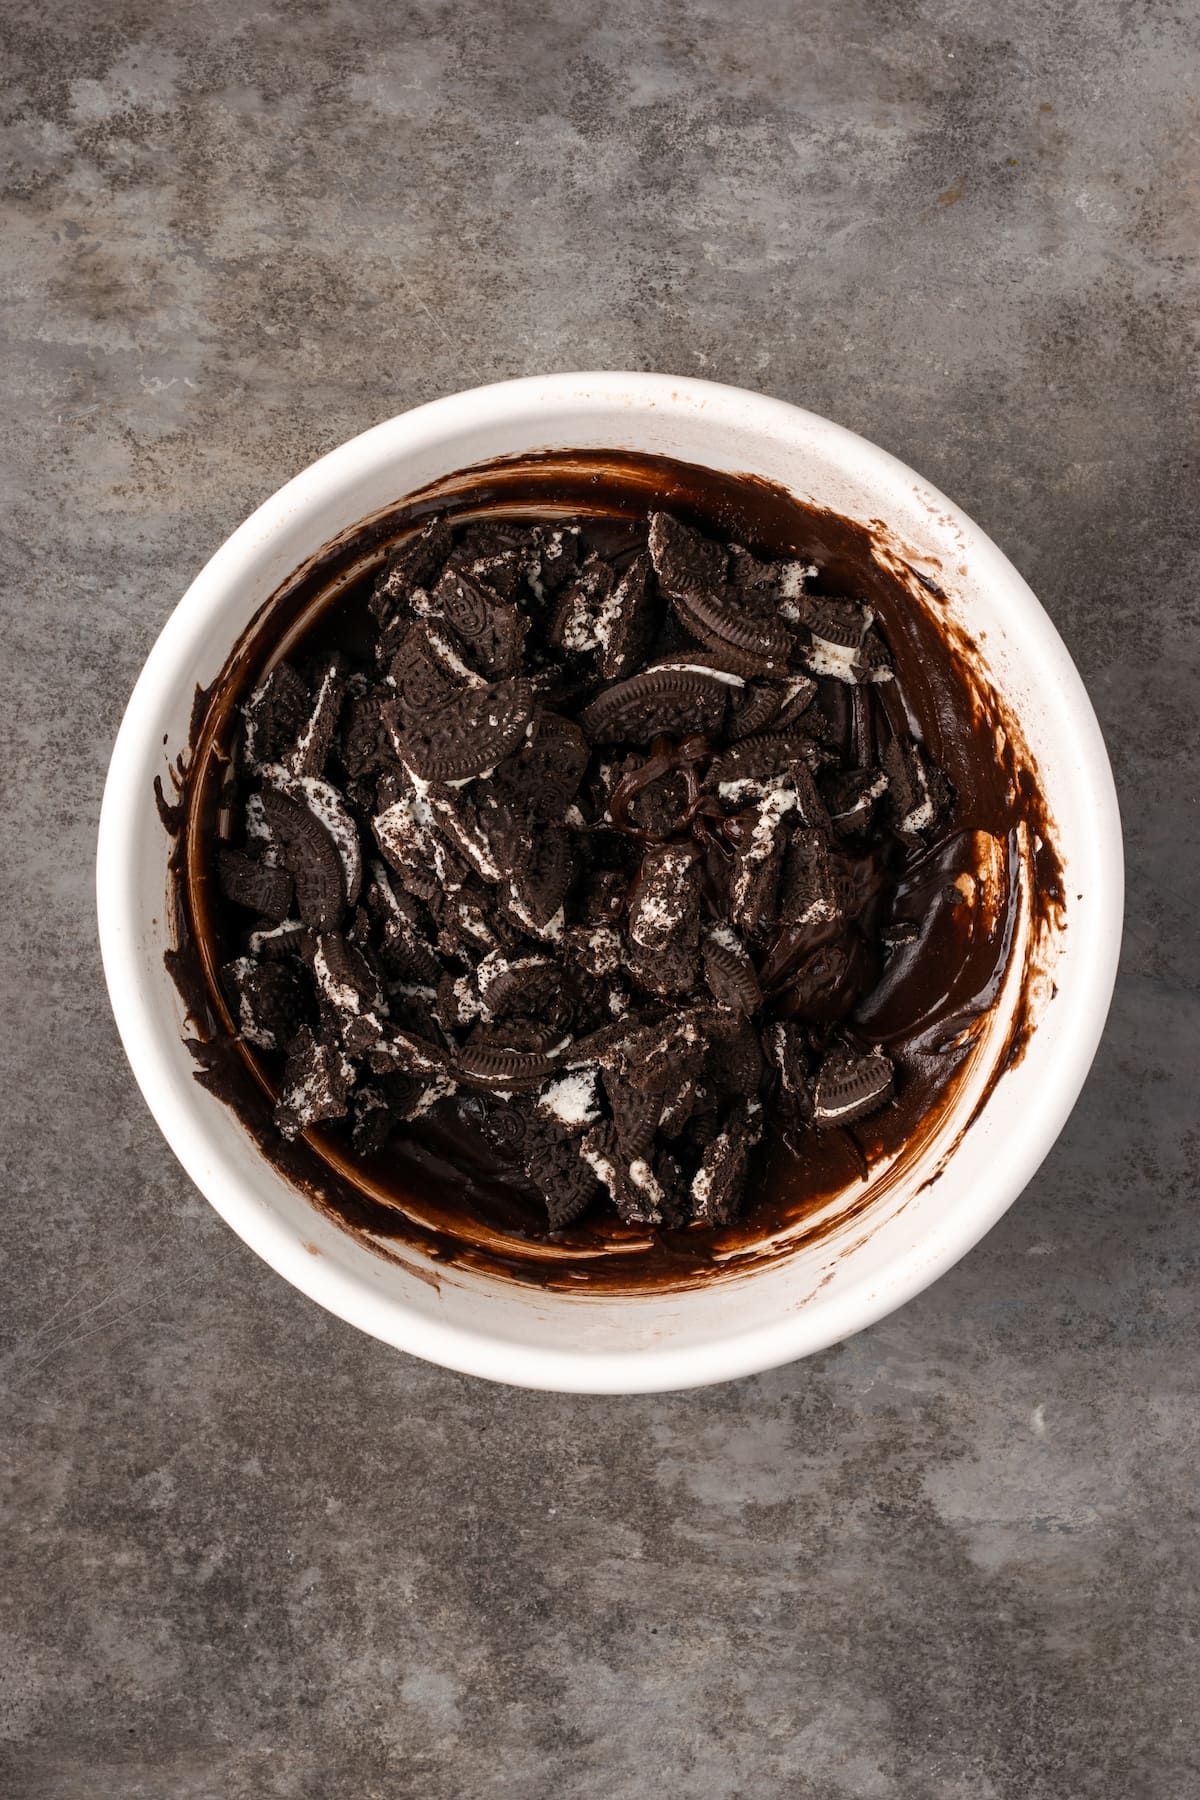 Chopped Oreos added to a bowl of chocolate brownie batter.